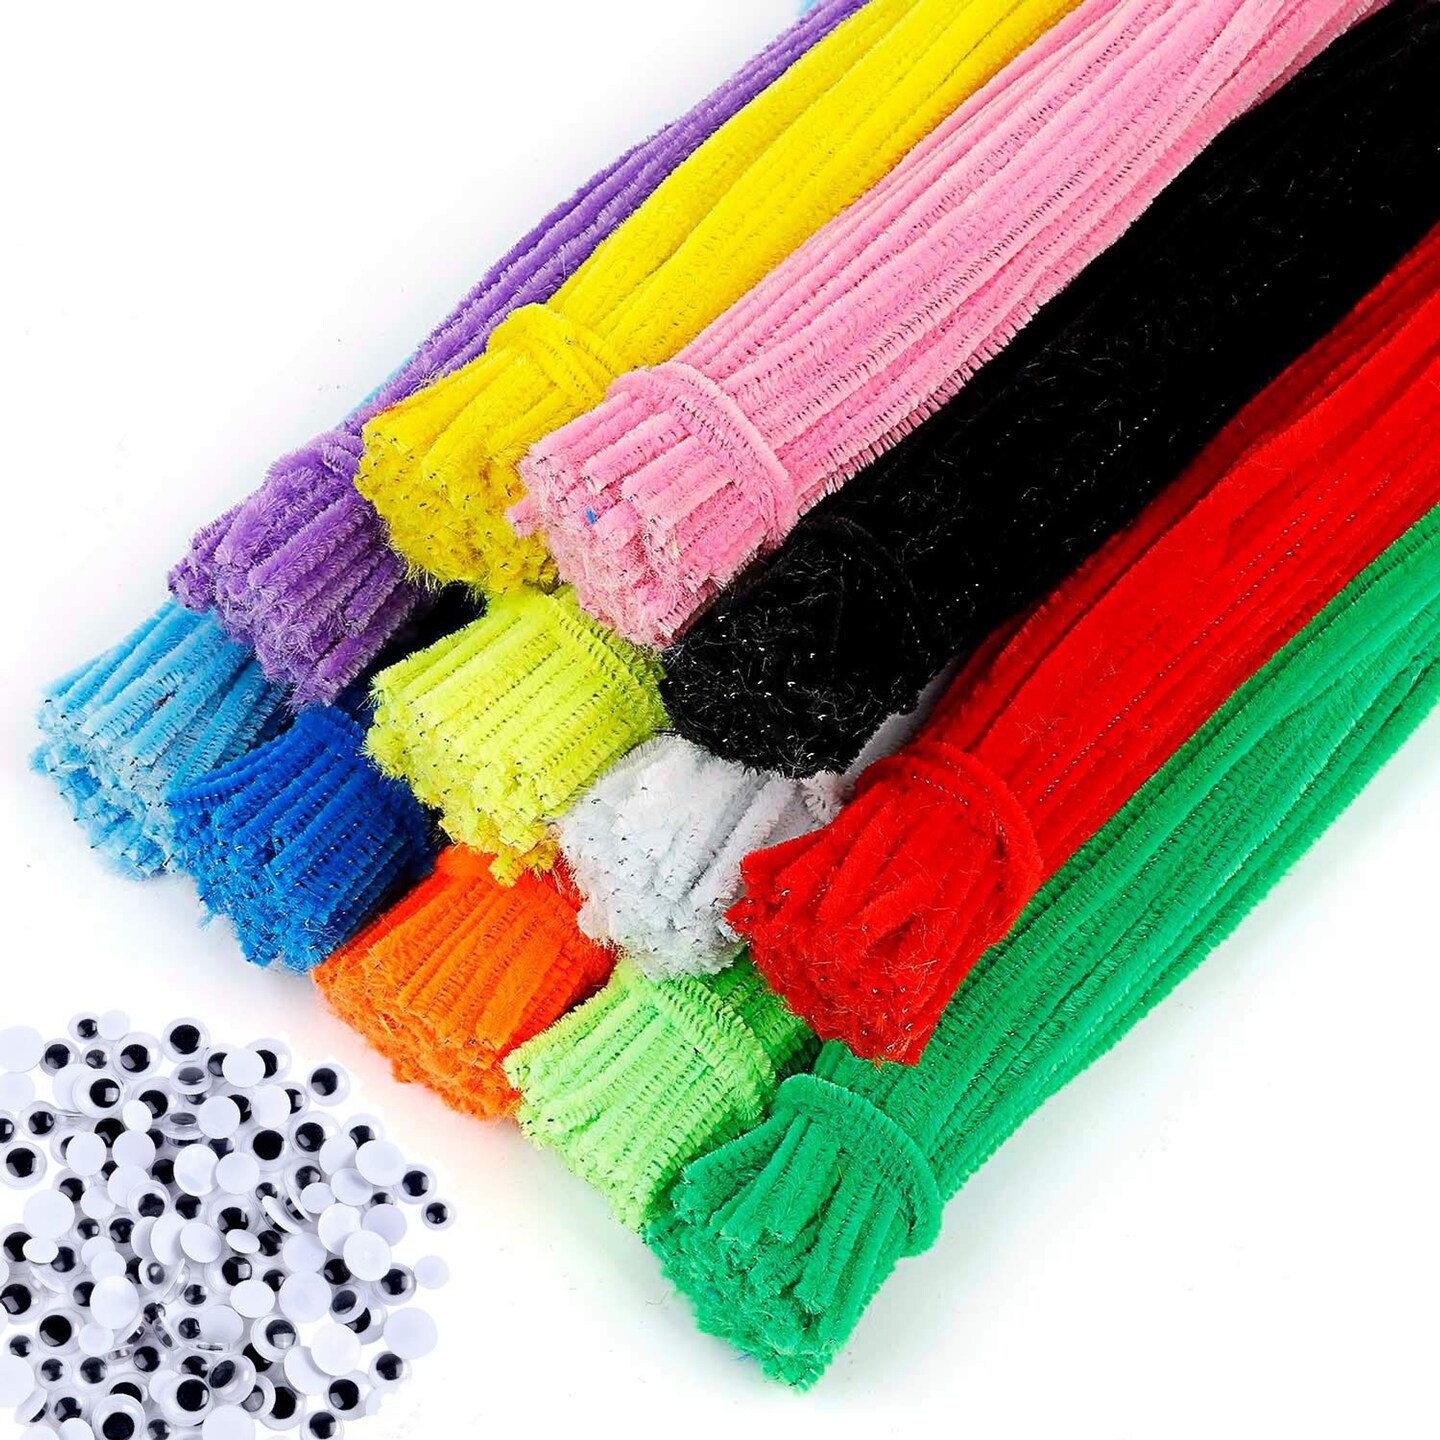 EpiqueOne 1300-Piece Arts &#x26; Craft Supply Set | Includes 1200 Chenille Pipe Cleaner Stems in 12 Colors &#x26; 100 Googly Eyes | Ideal for Use at Home &#x26; School for DIY Art &#x26; Craft Projects, Decoration &#x26; More